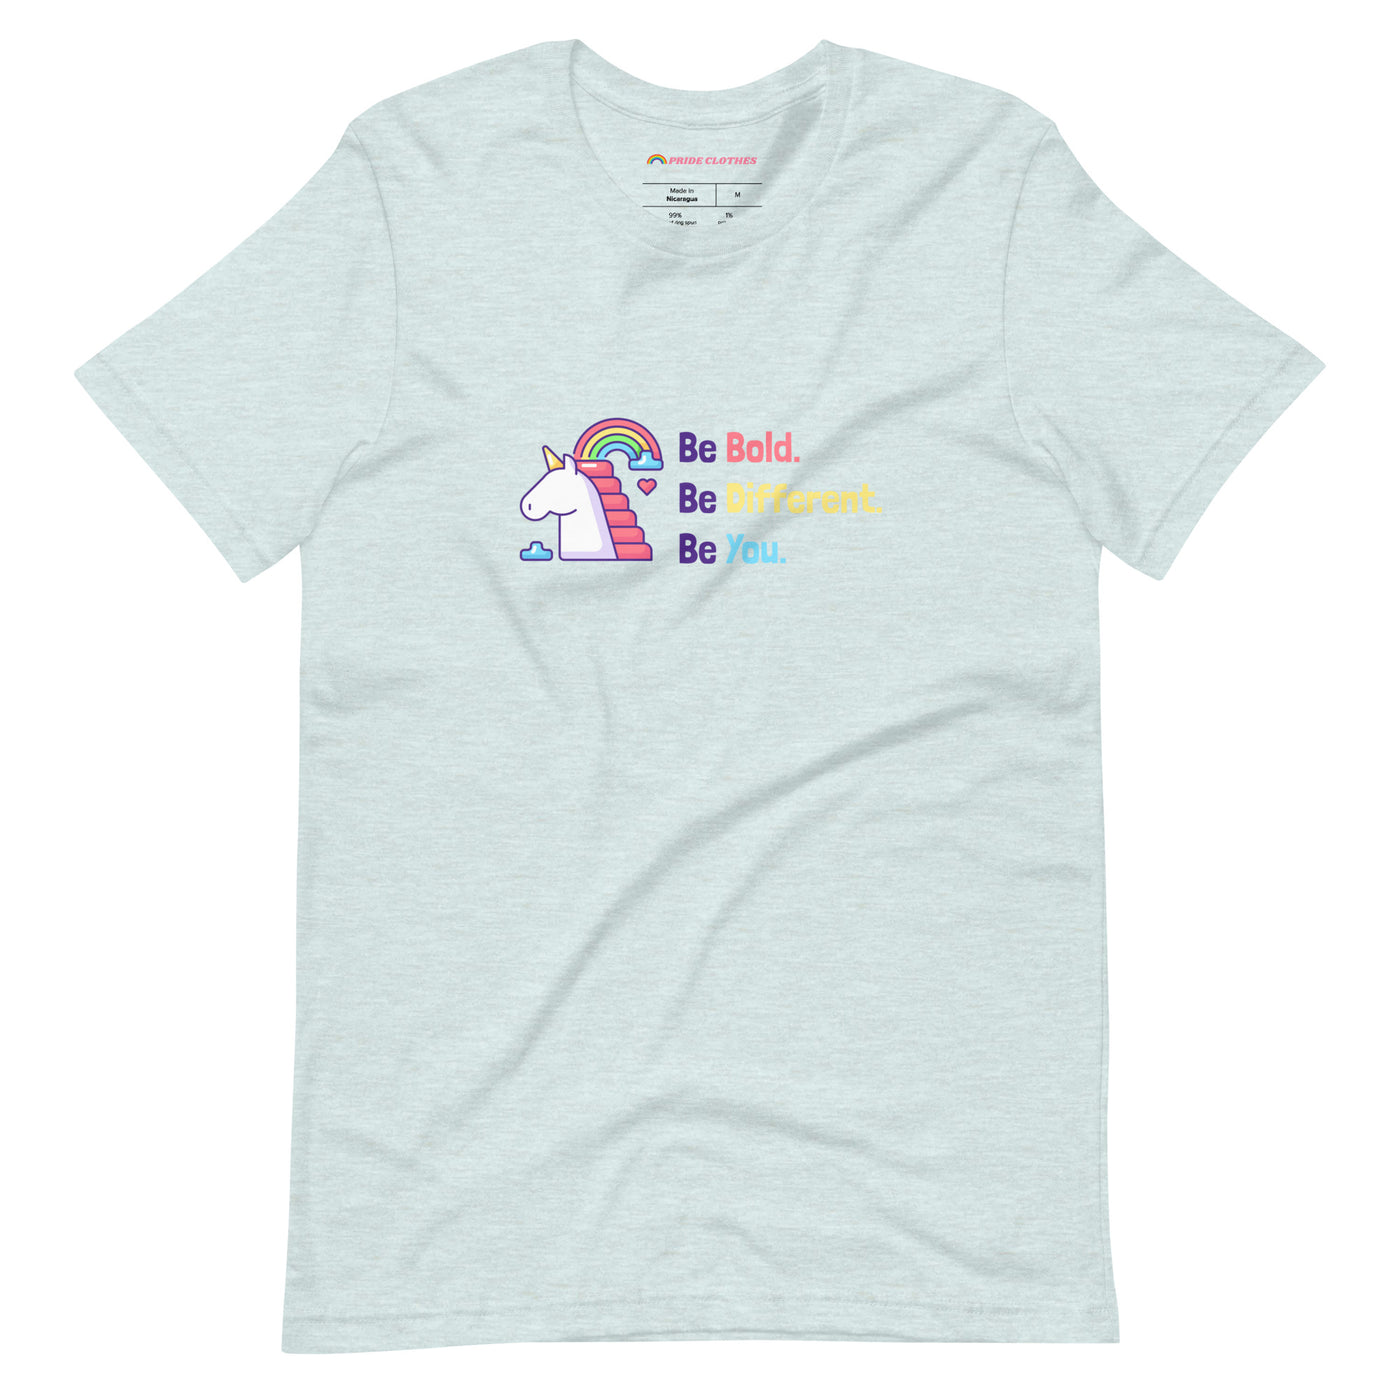 Pride Clothes - Be Bold Different & Uniquely You Unicorn Pride T-Shirt - Heather Prism Ice Blue